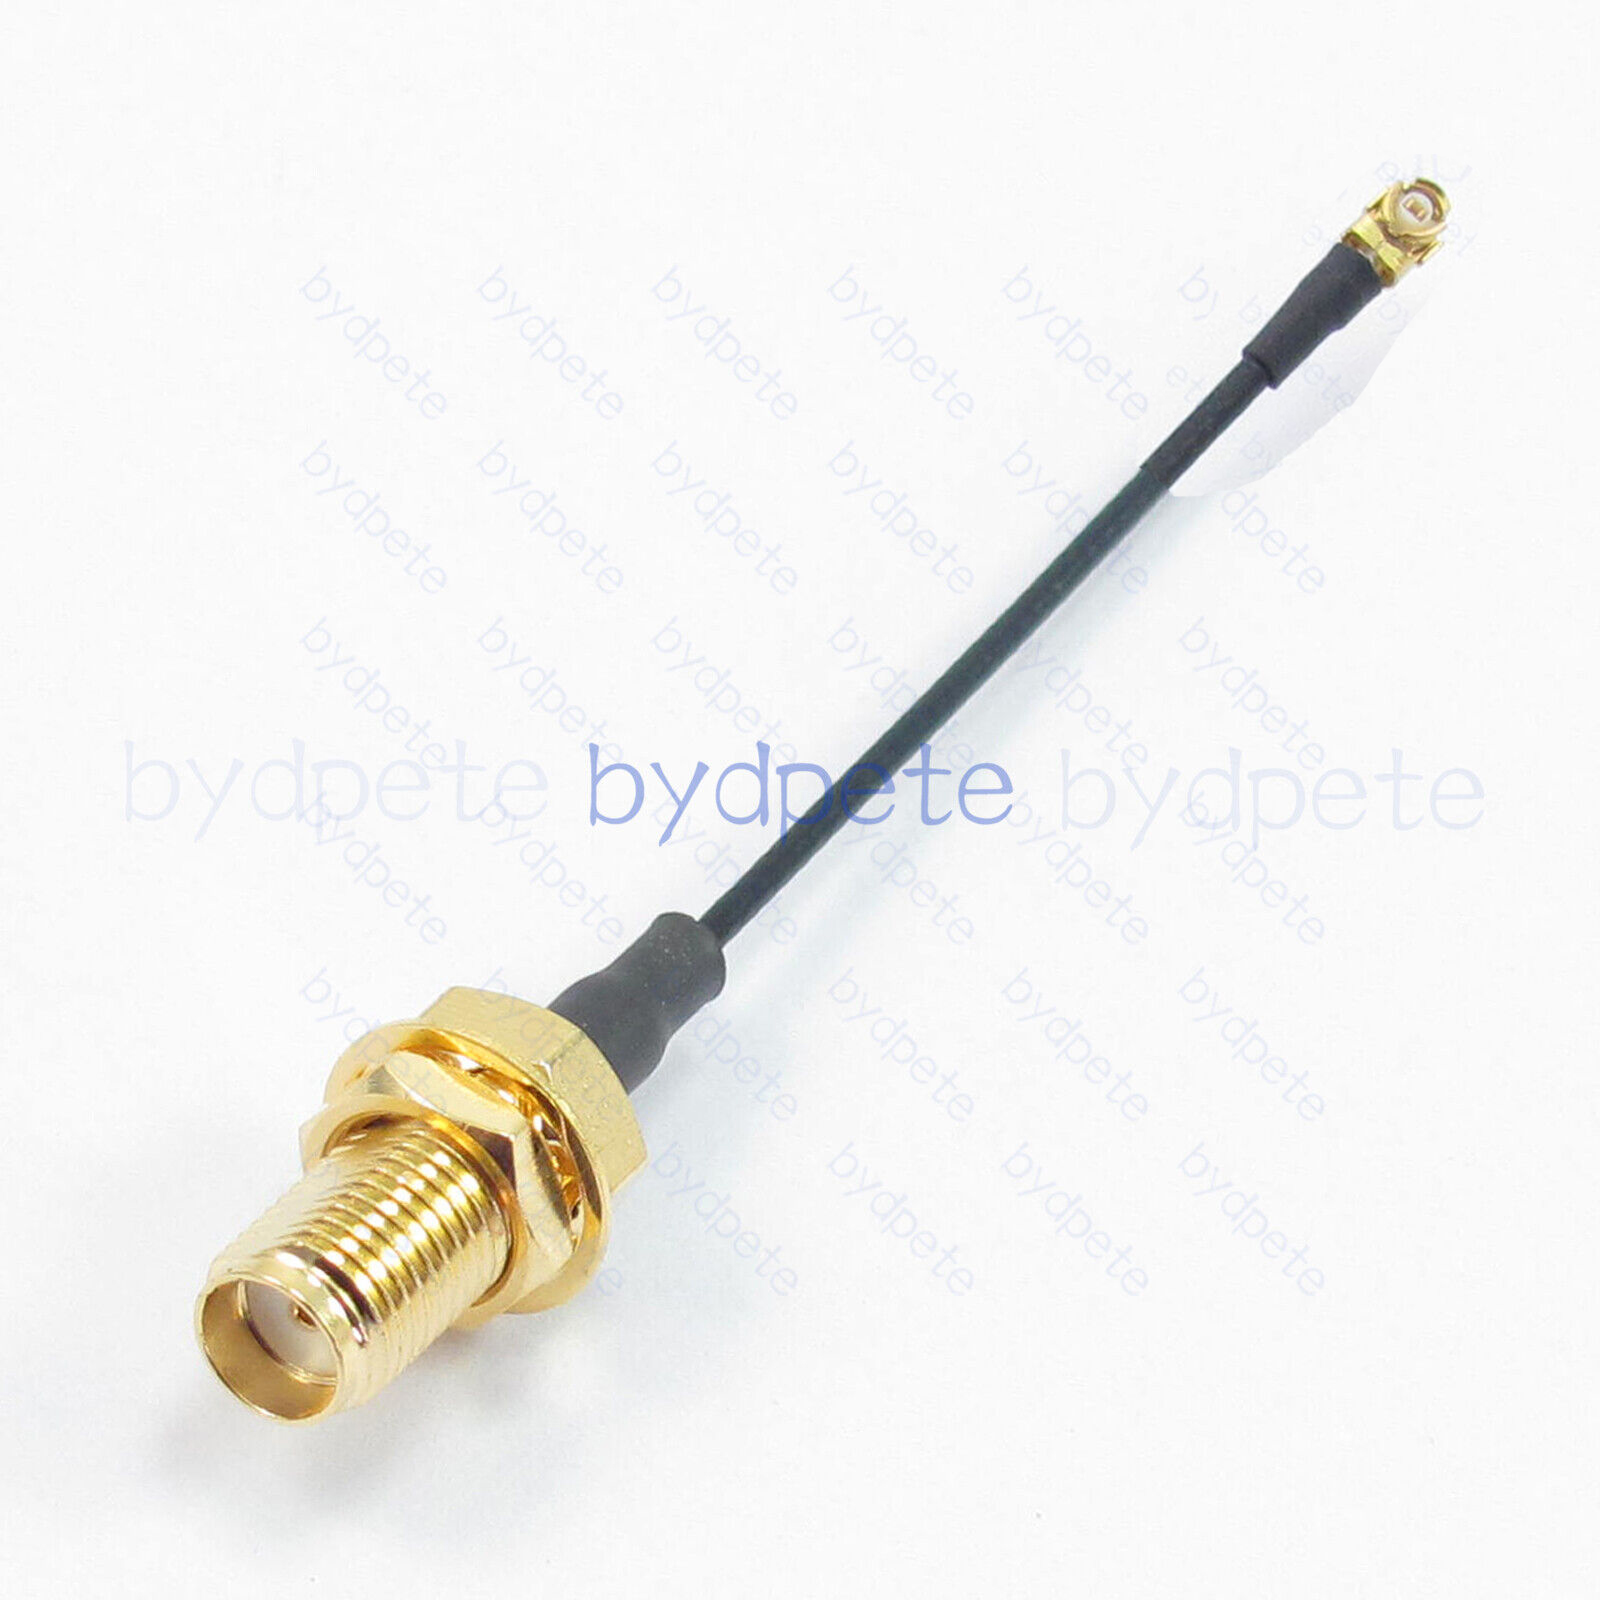 UFL U.FL IPX IPEX Plug to SMA jack bulkhead Hex 8mm D-cut 1.37mm Pigtail cable Coaxial Koaxial Kable RF 50ohms bydpete